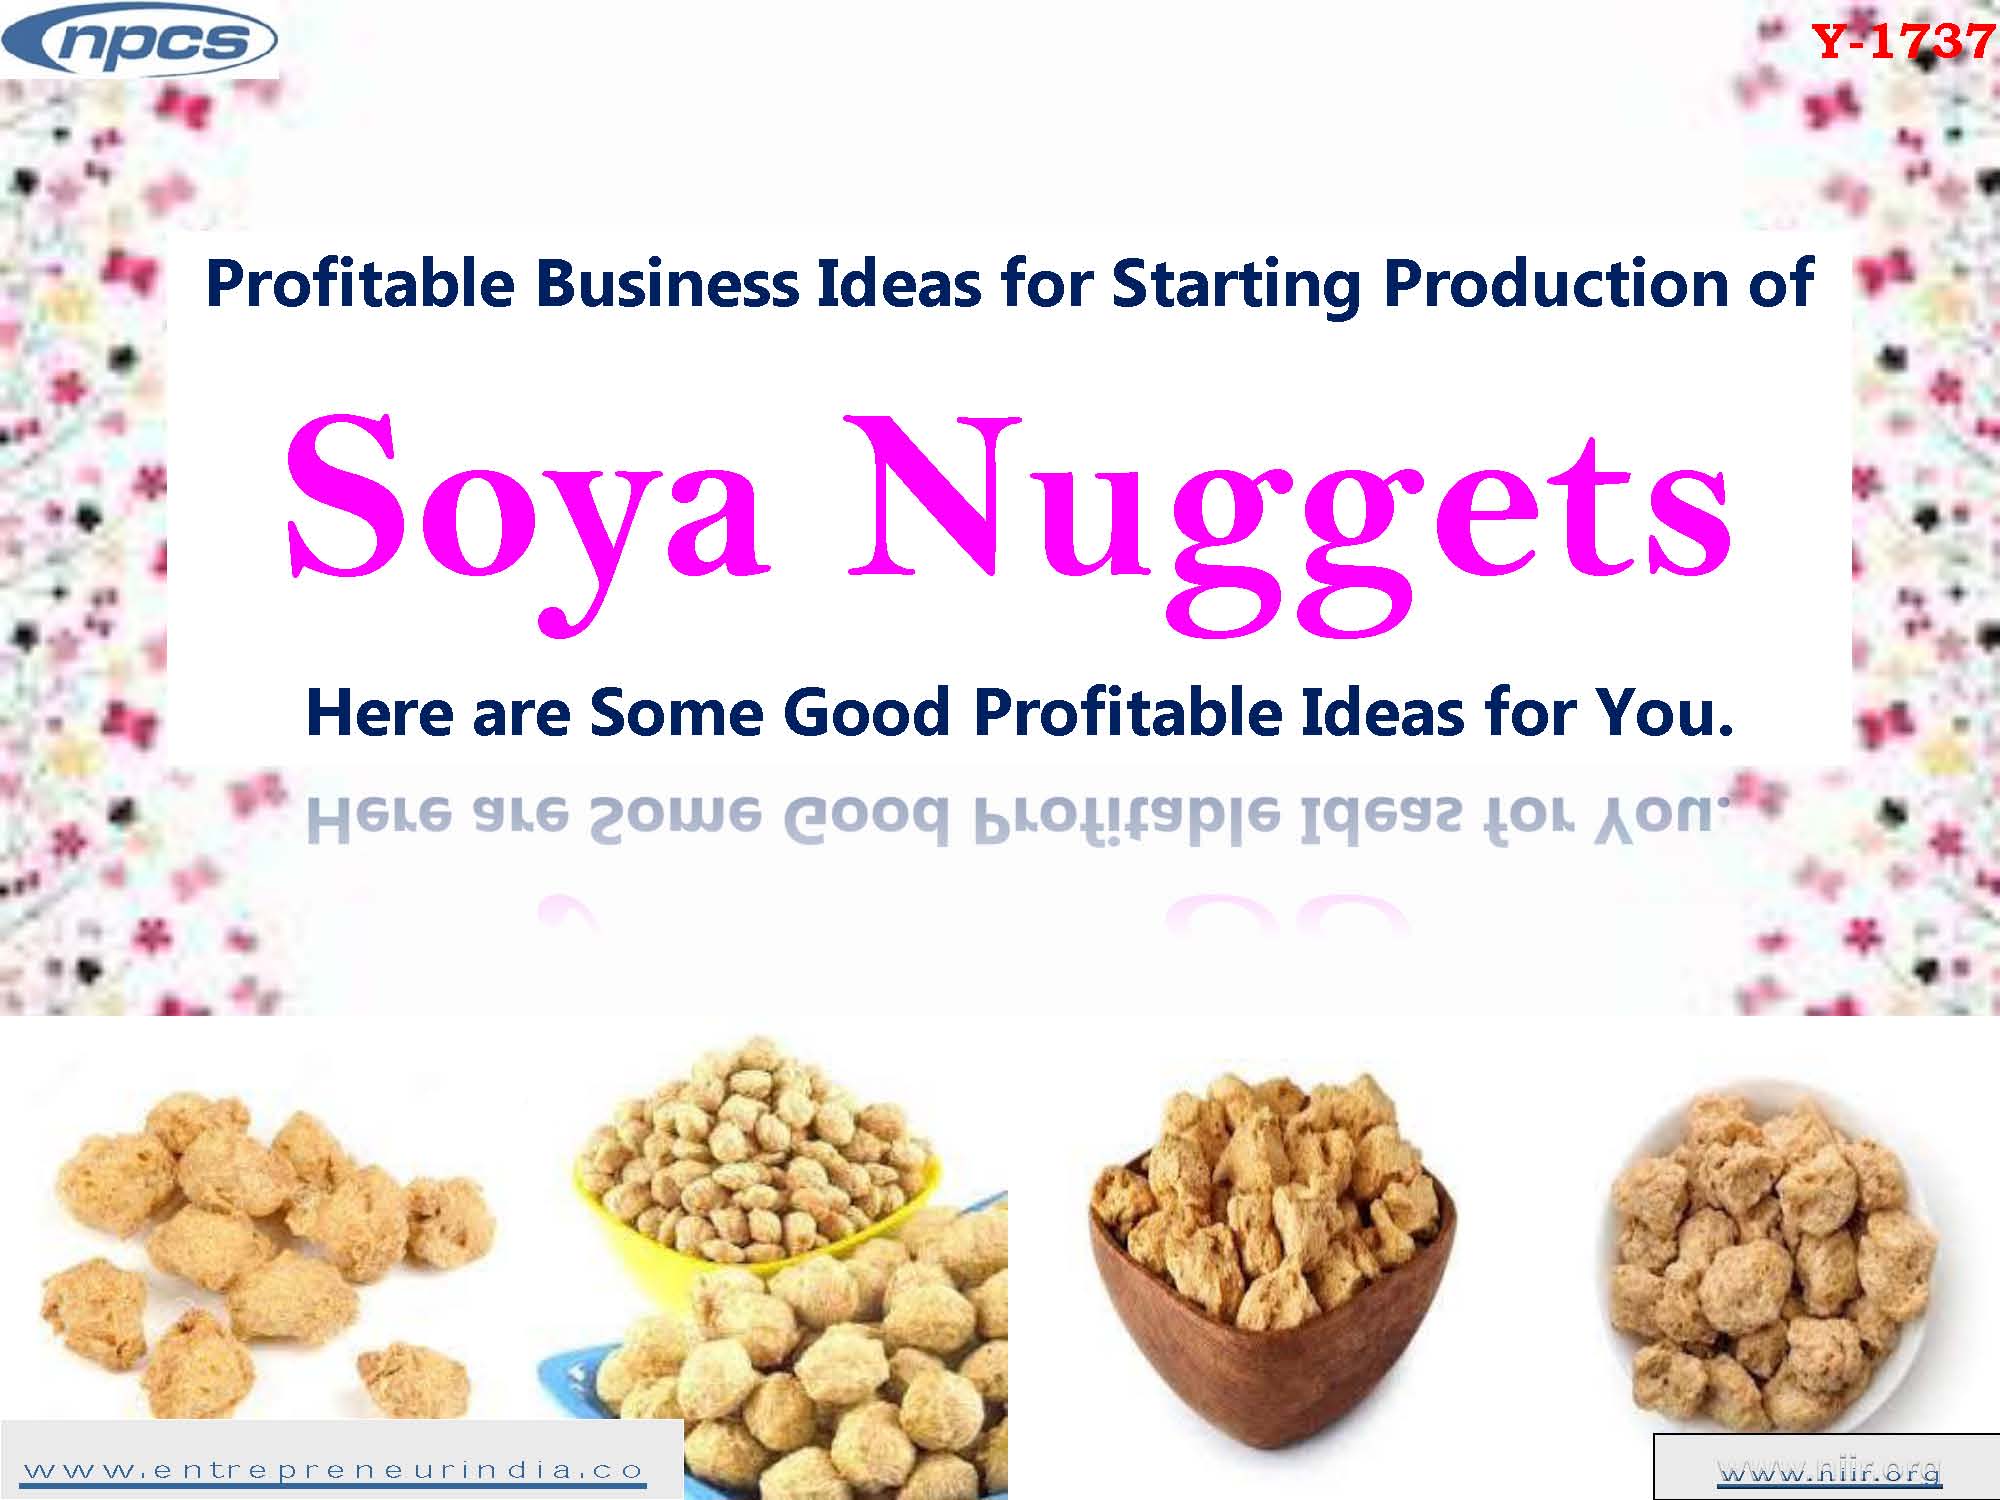 Profitable Business Ideas for Starting Production of Soya Nuggets, Here are Some Good Profitable Ideas for You